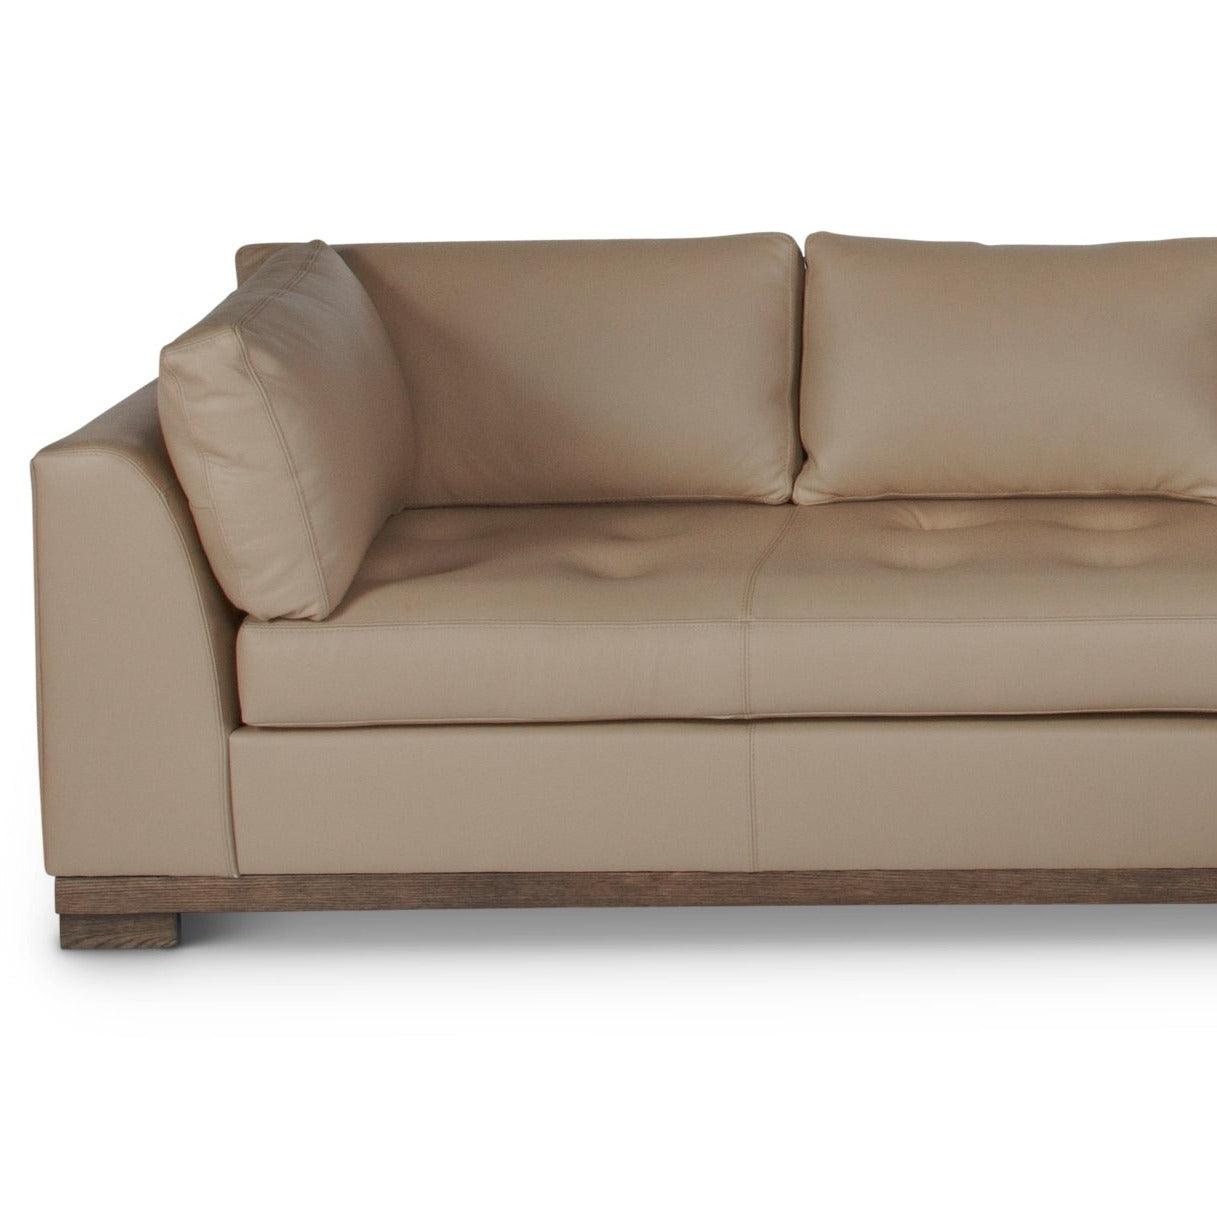 Colony Large Leather Sectional Couch With Chaise Made to Order - Uptown Sebastian